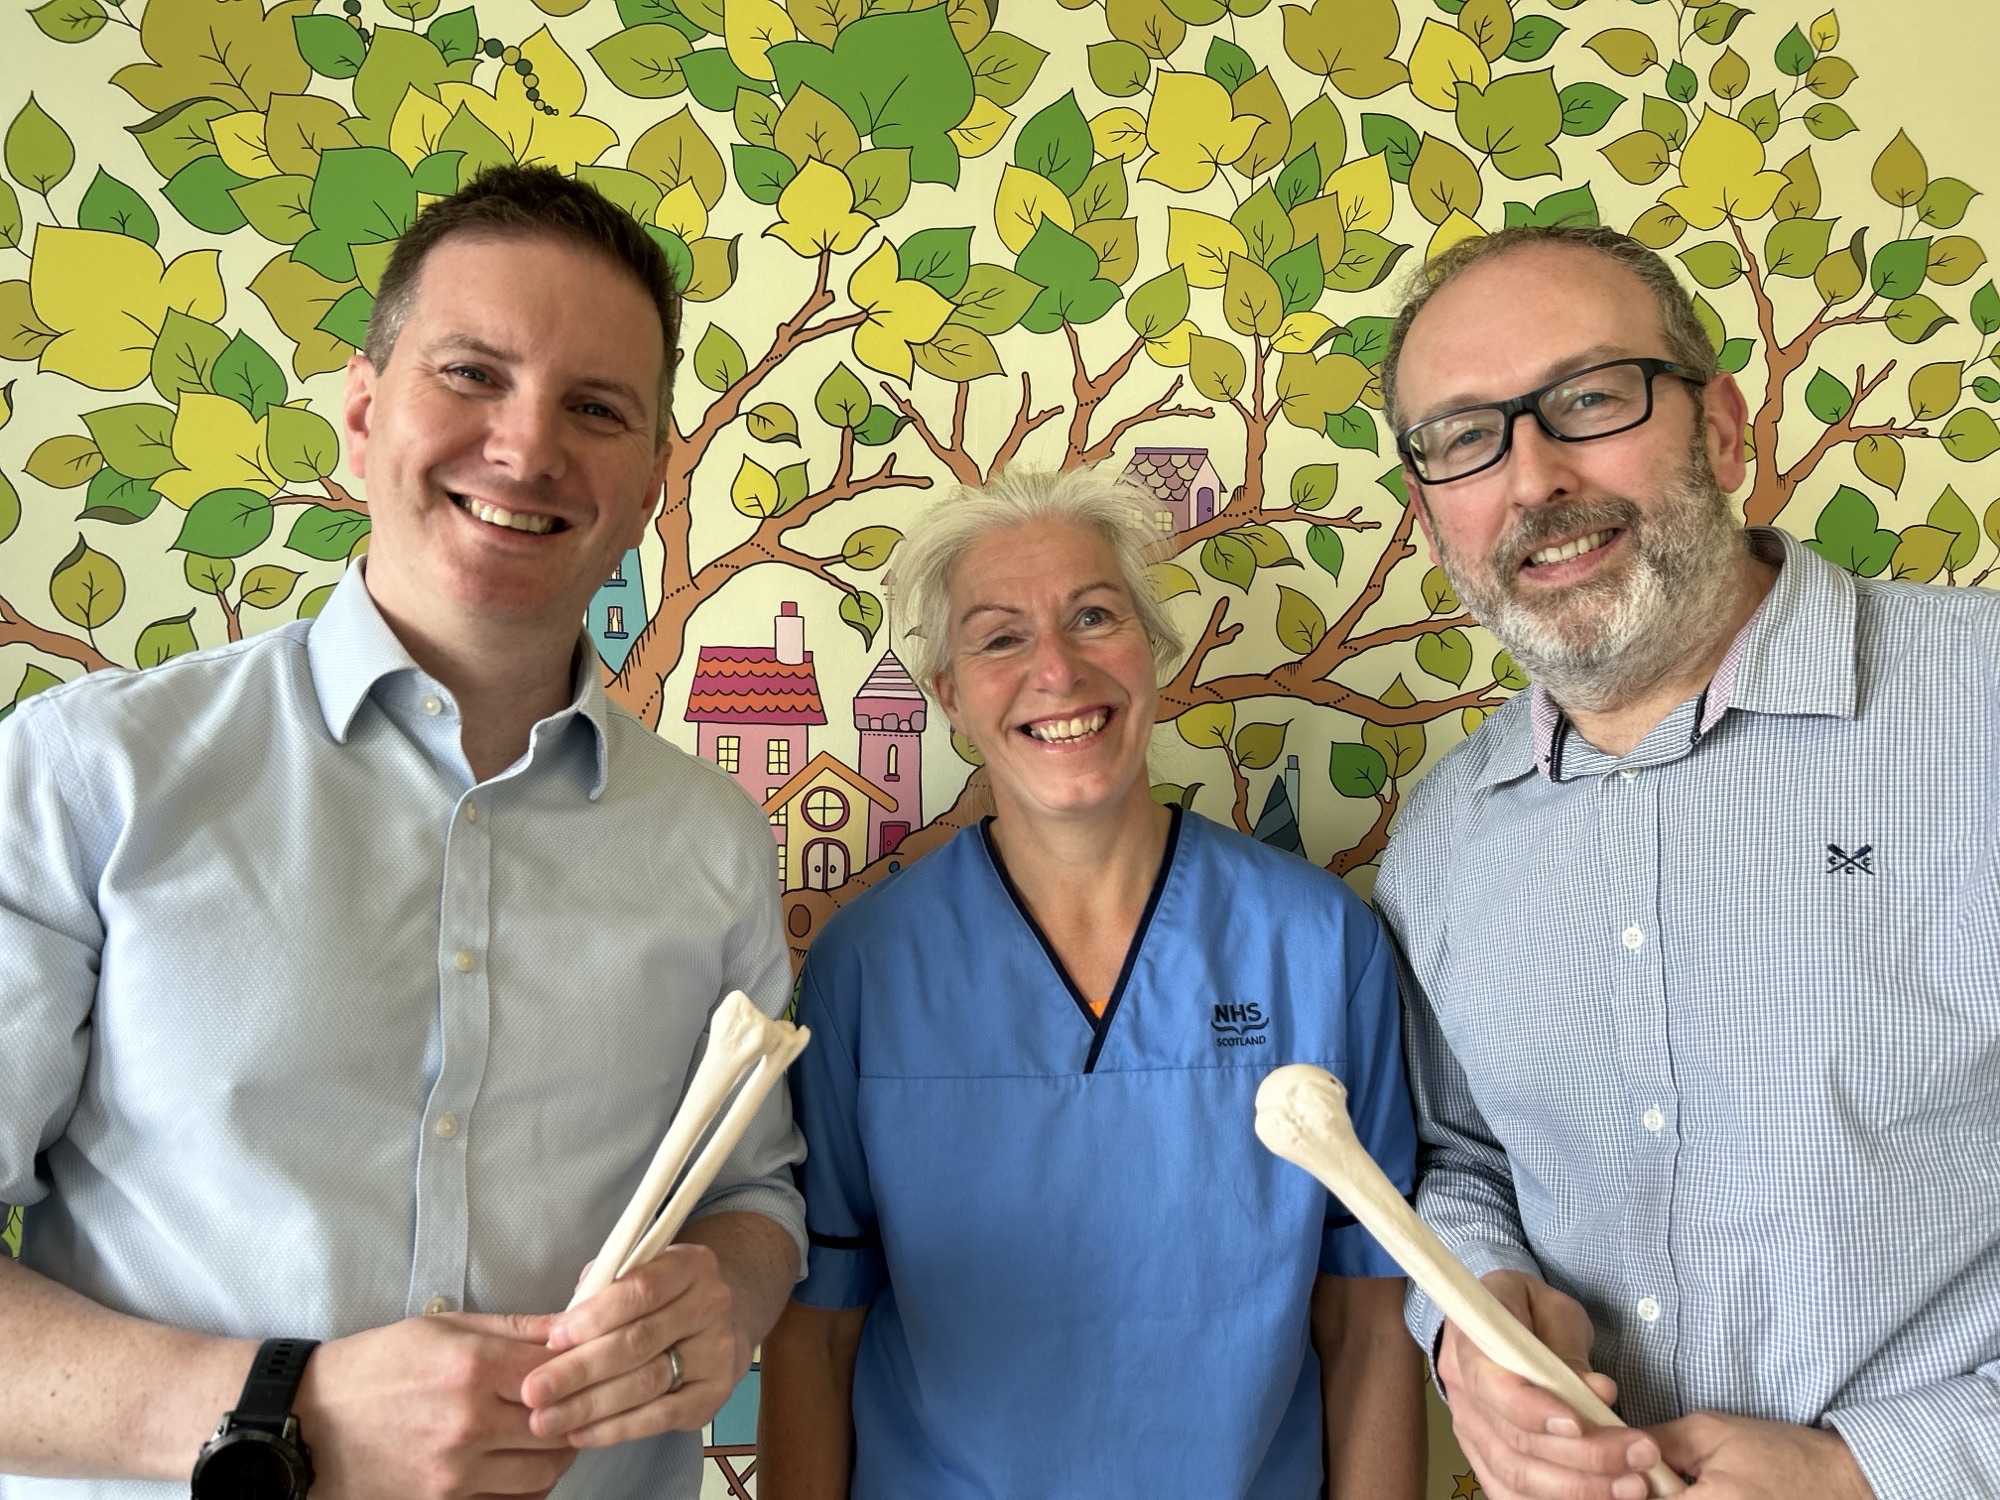 (from left to right) Mike Reidy, Maggie Connon and Simon Barker, both within the Craig Research Unit and outside Royal Aberdeen Children’s Hospital.